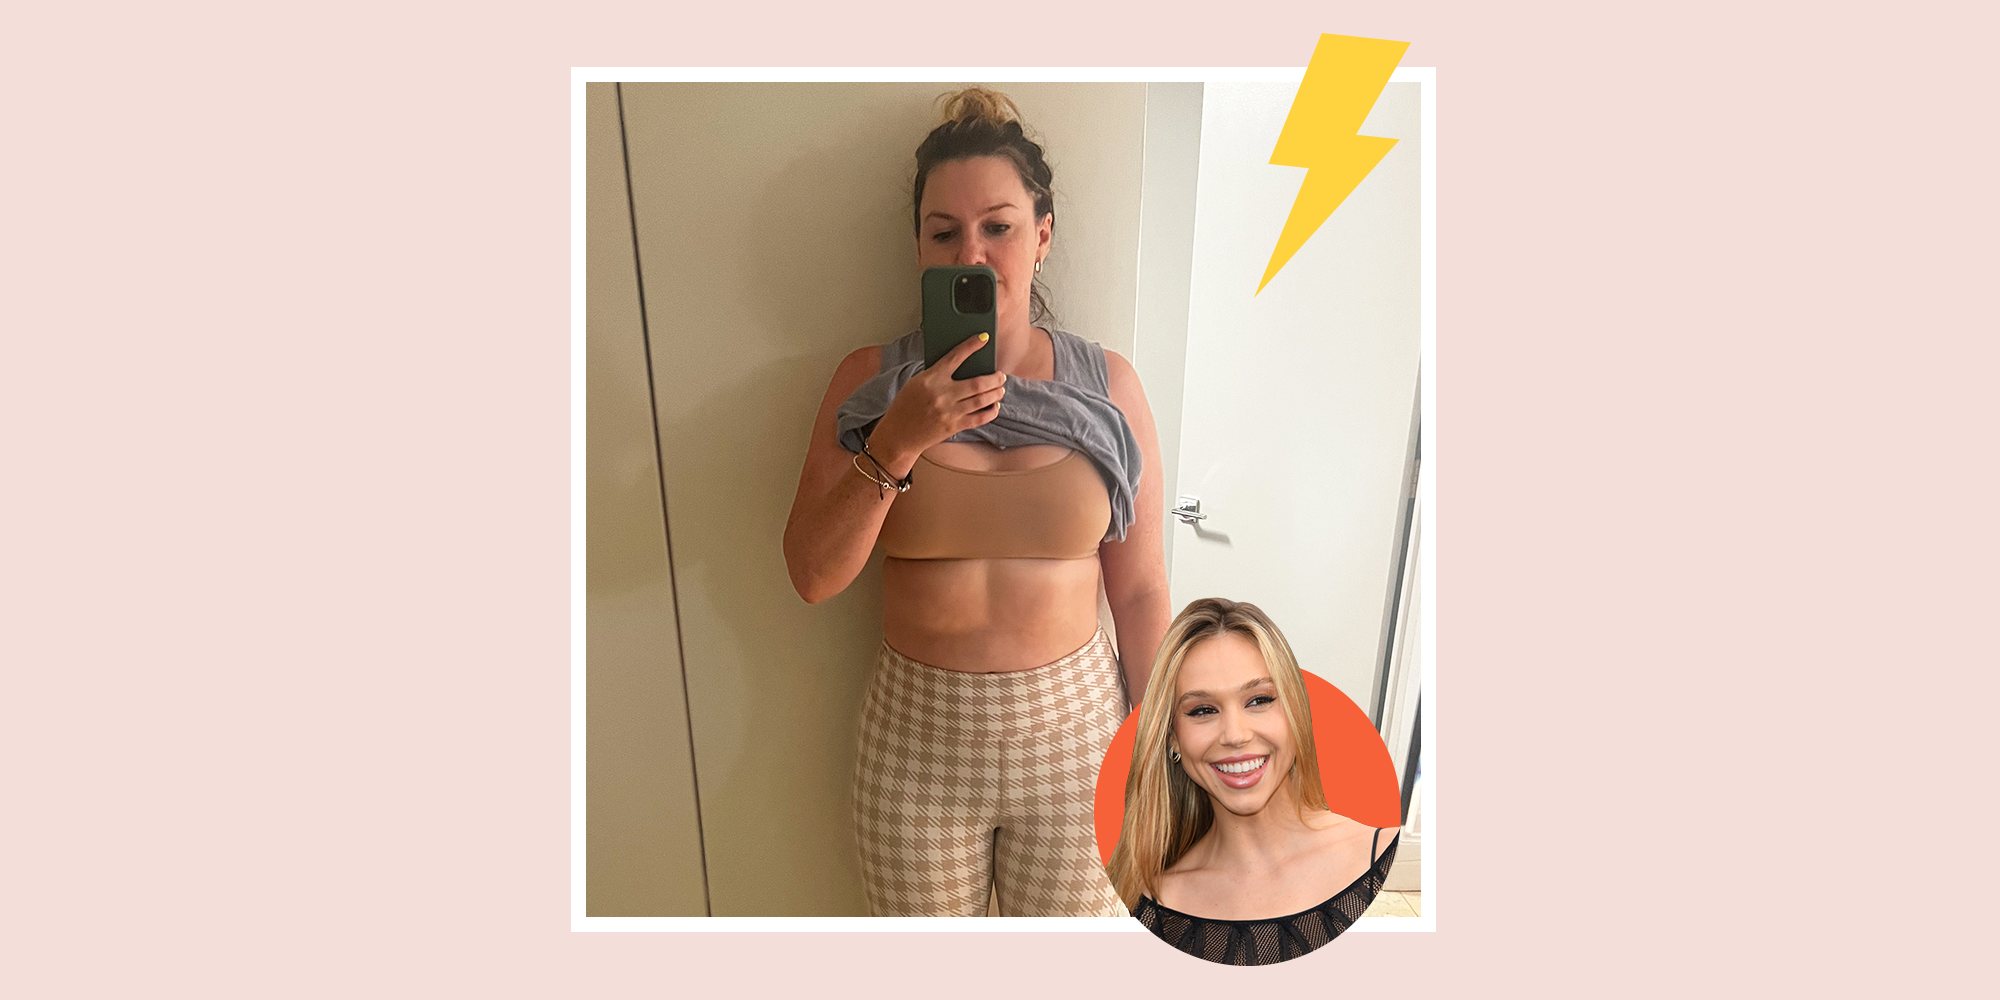 Alexis Ren Ab Workout Review: I Tried The 10-Minute Core Video